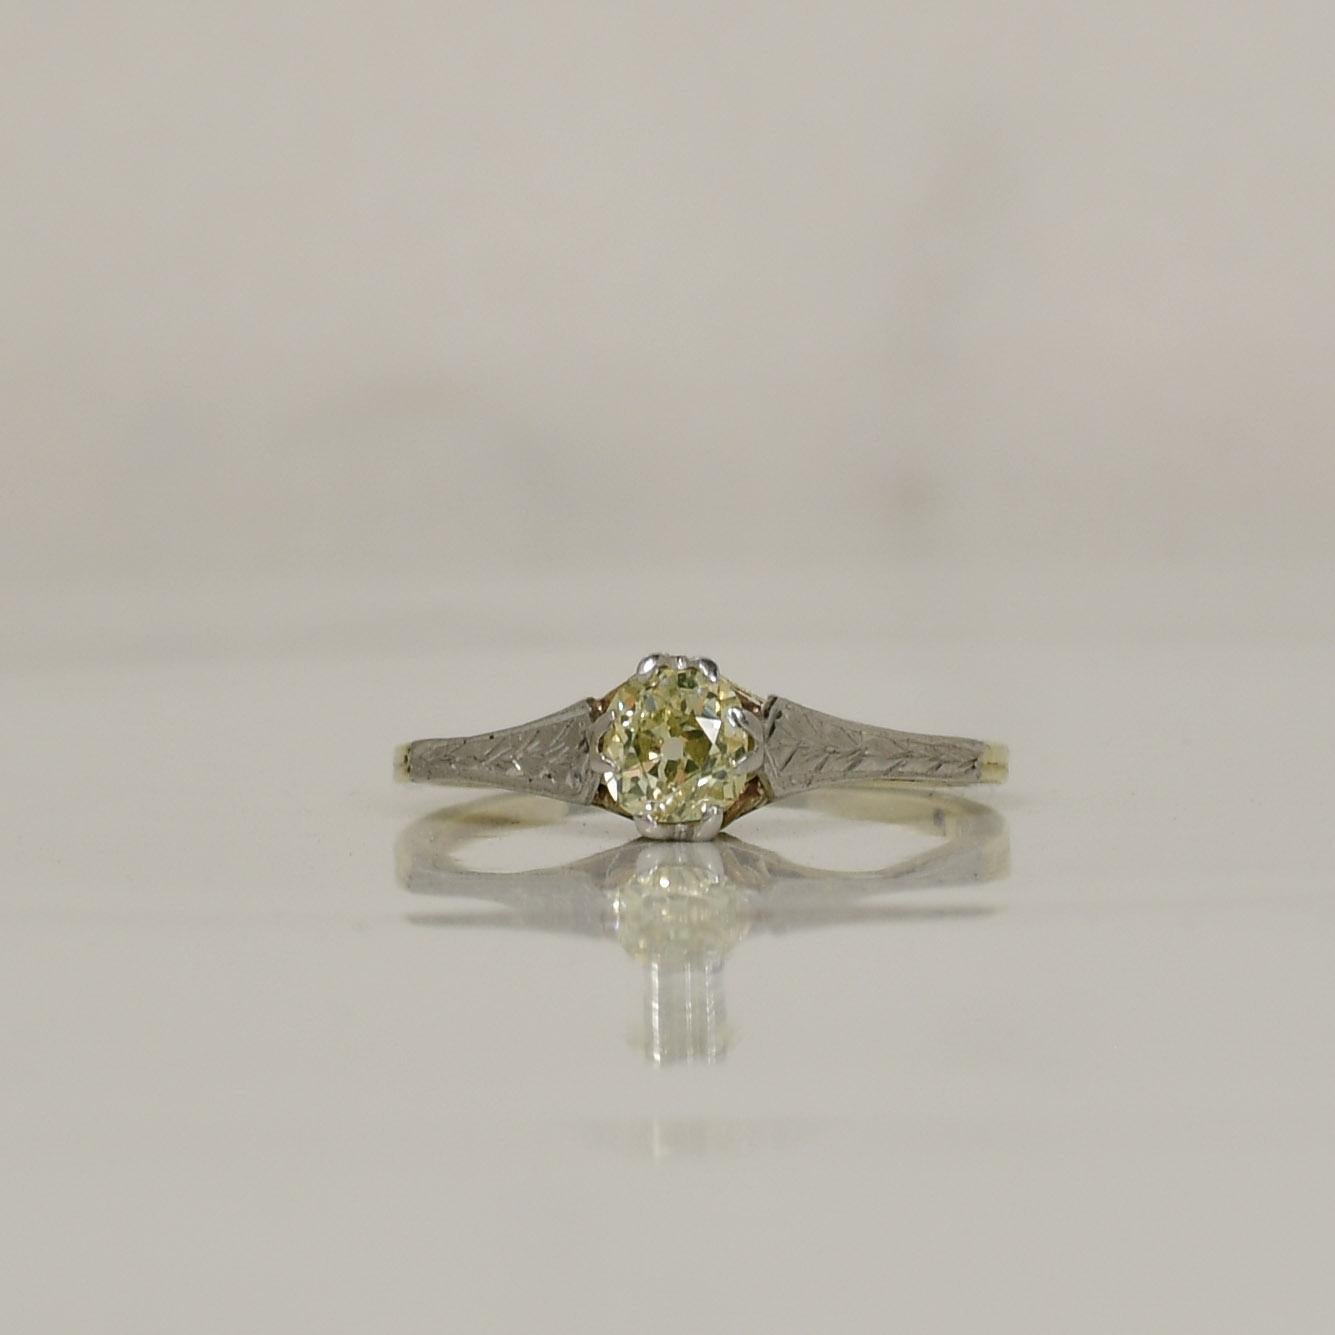 The Two Toned Gold Old Miner Cut 14K Yellow Diamond Solitaire Ring is a striking and distinctive piece of jewelry that seamlessly blends vintage charm with modern elegance. This exquisite ring showcases a brilliant old miner cut yellow diamond,